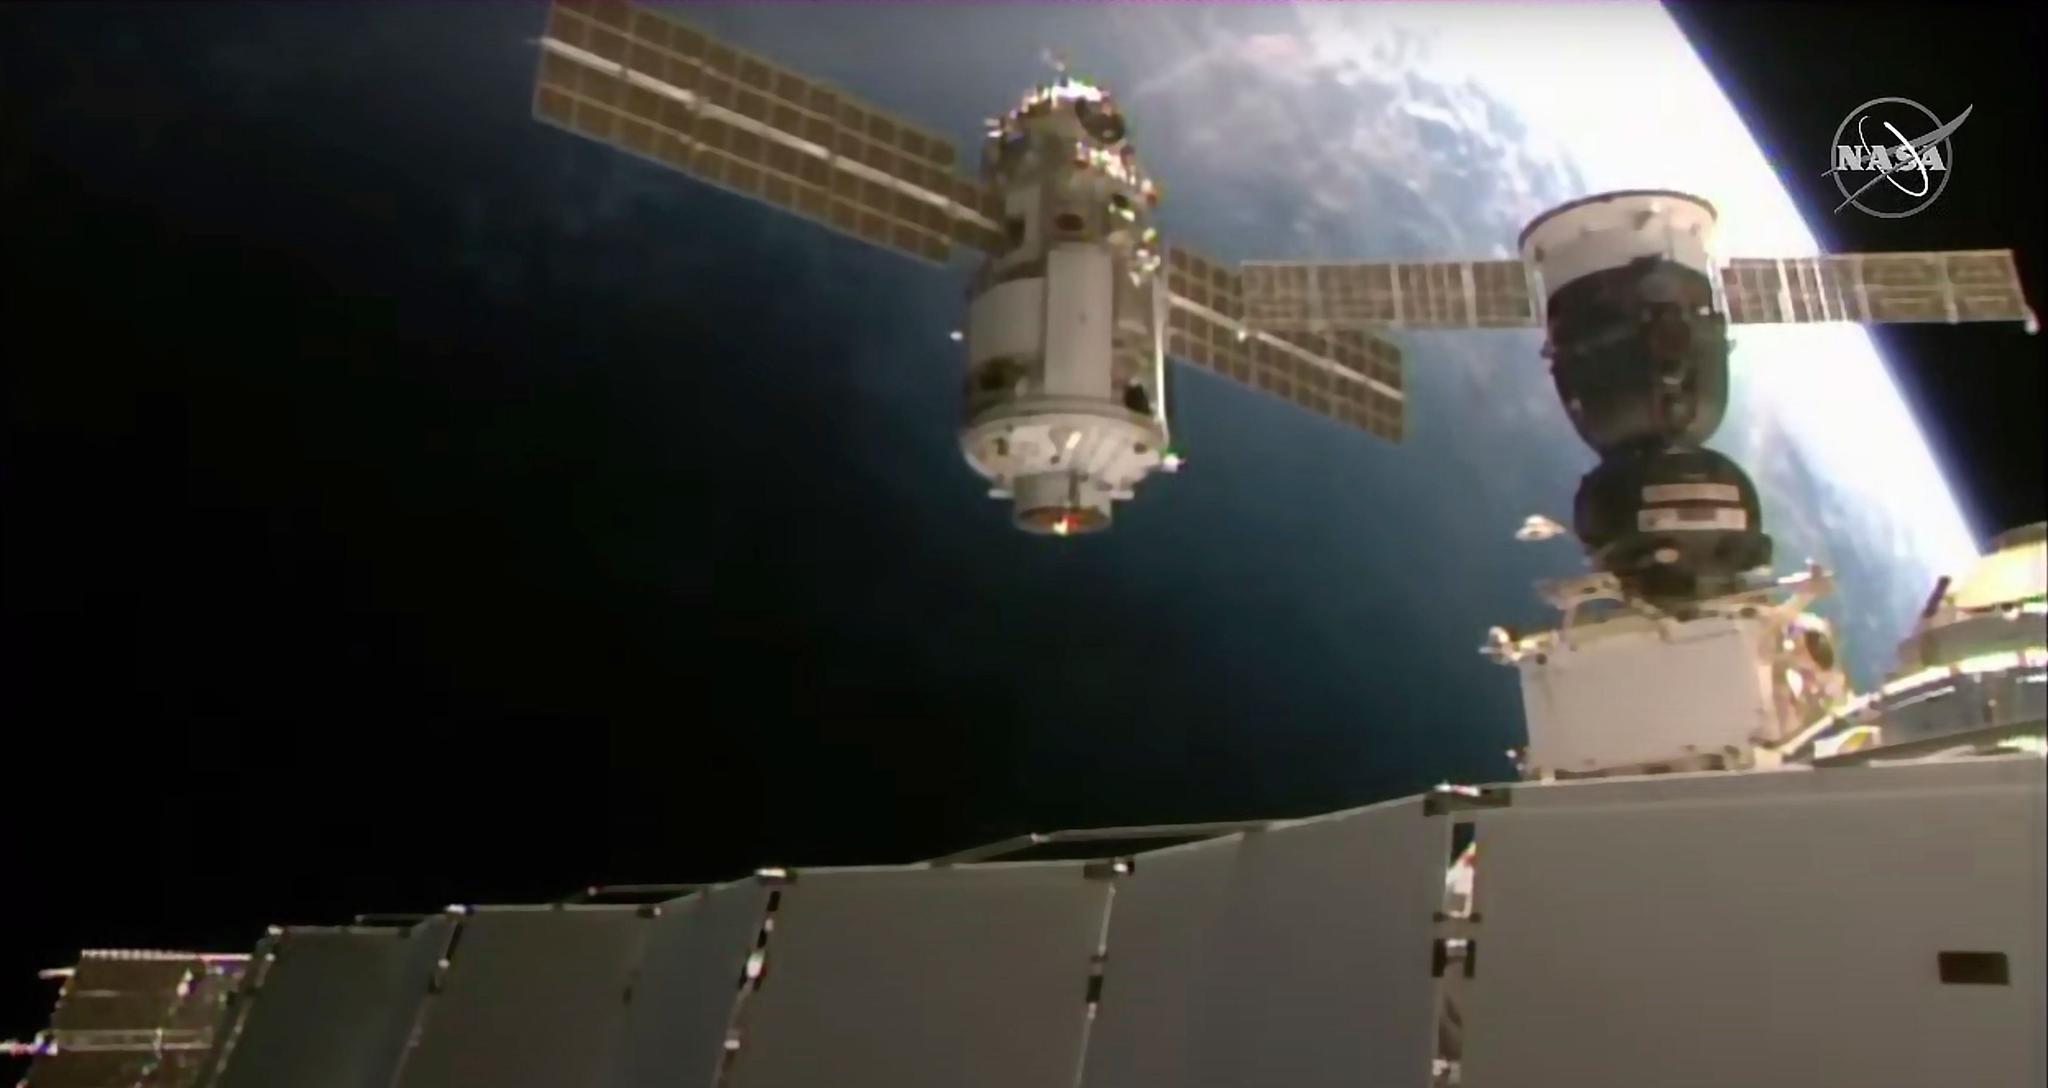 Nauka module as it approaches the International Space Station